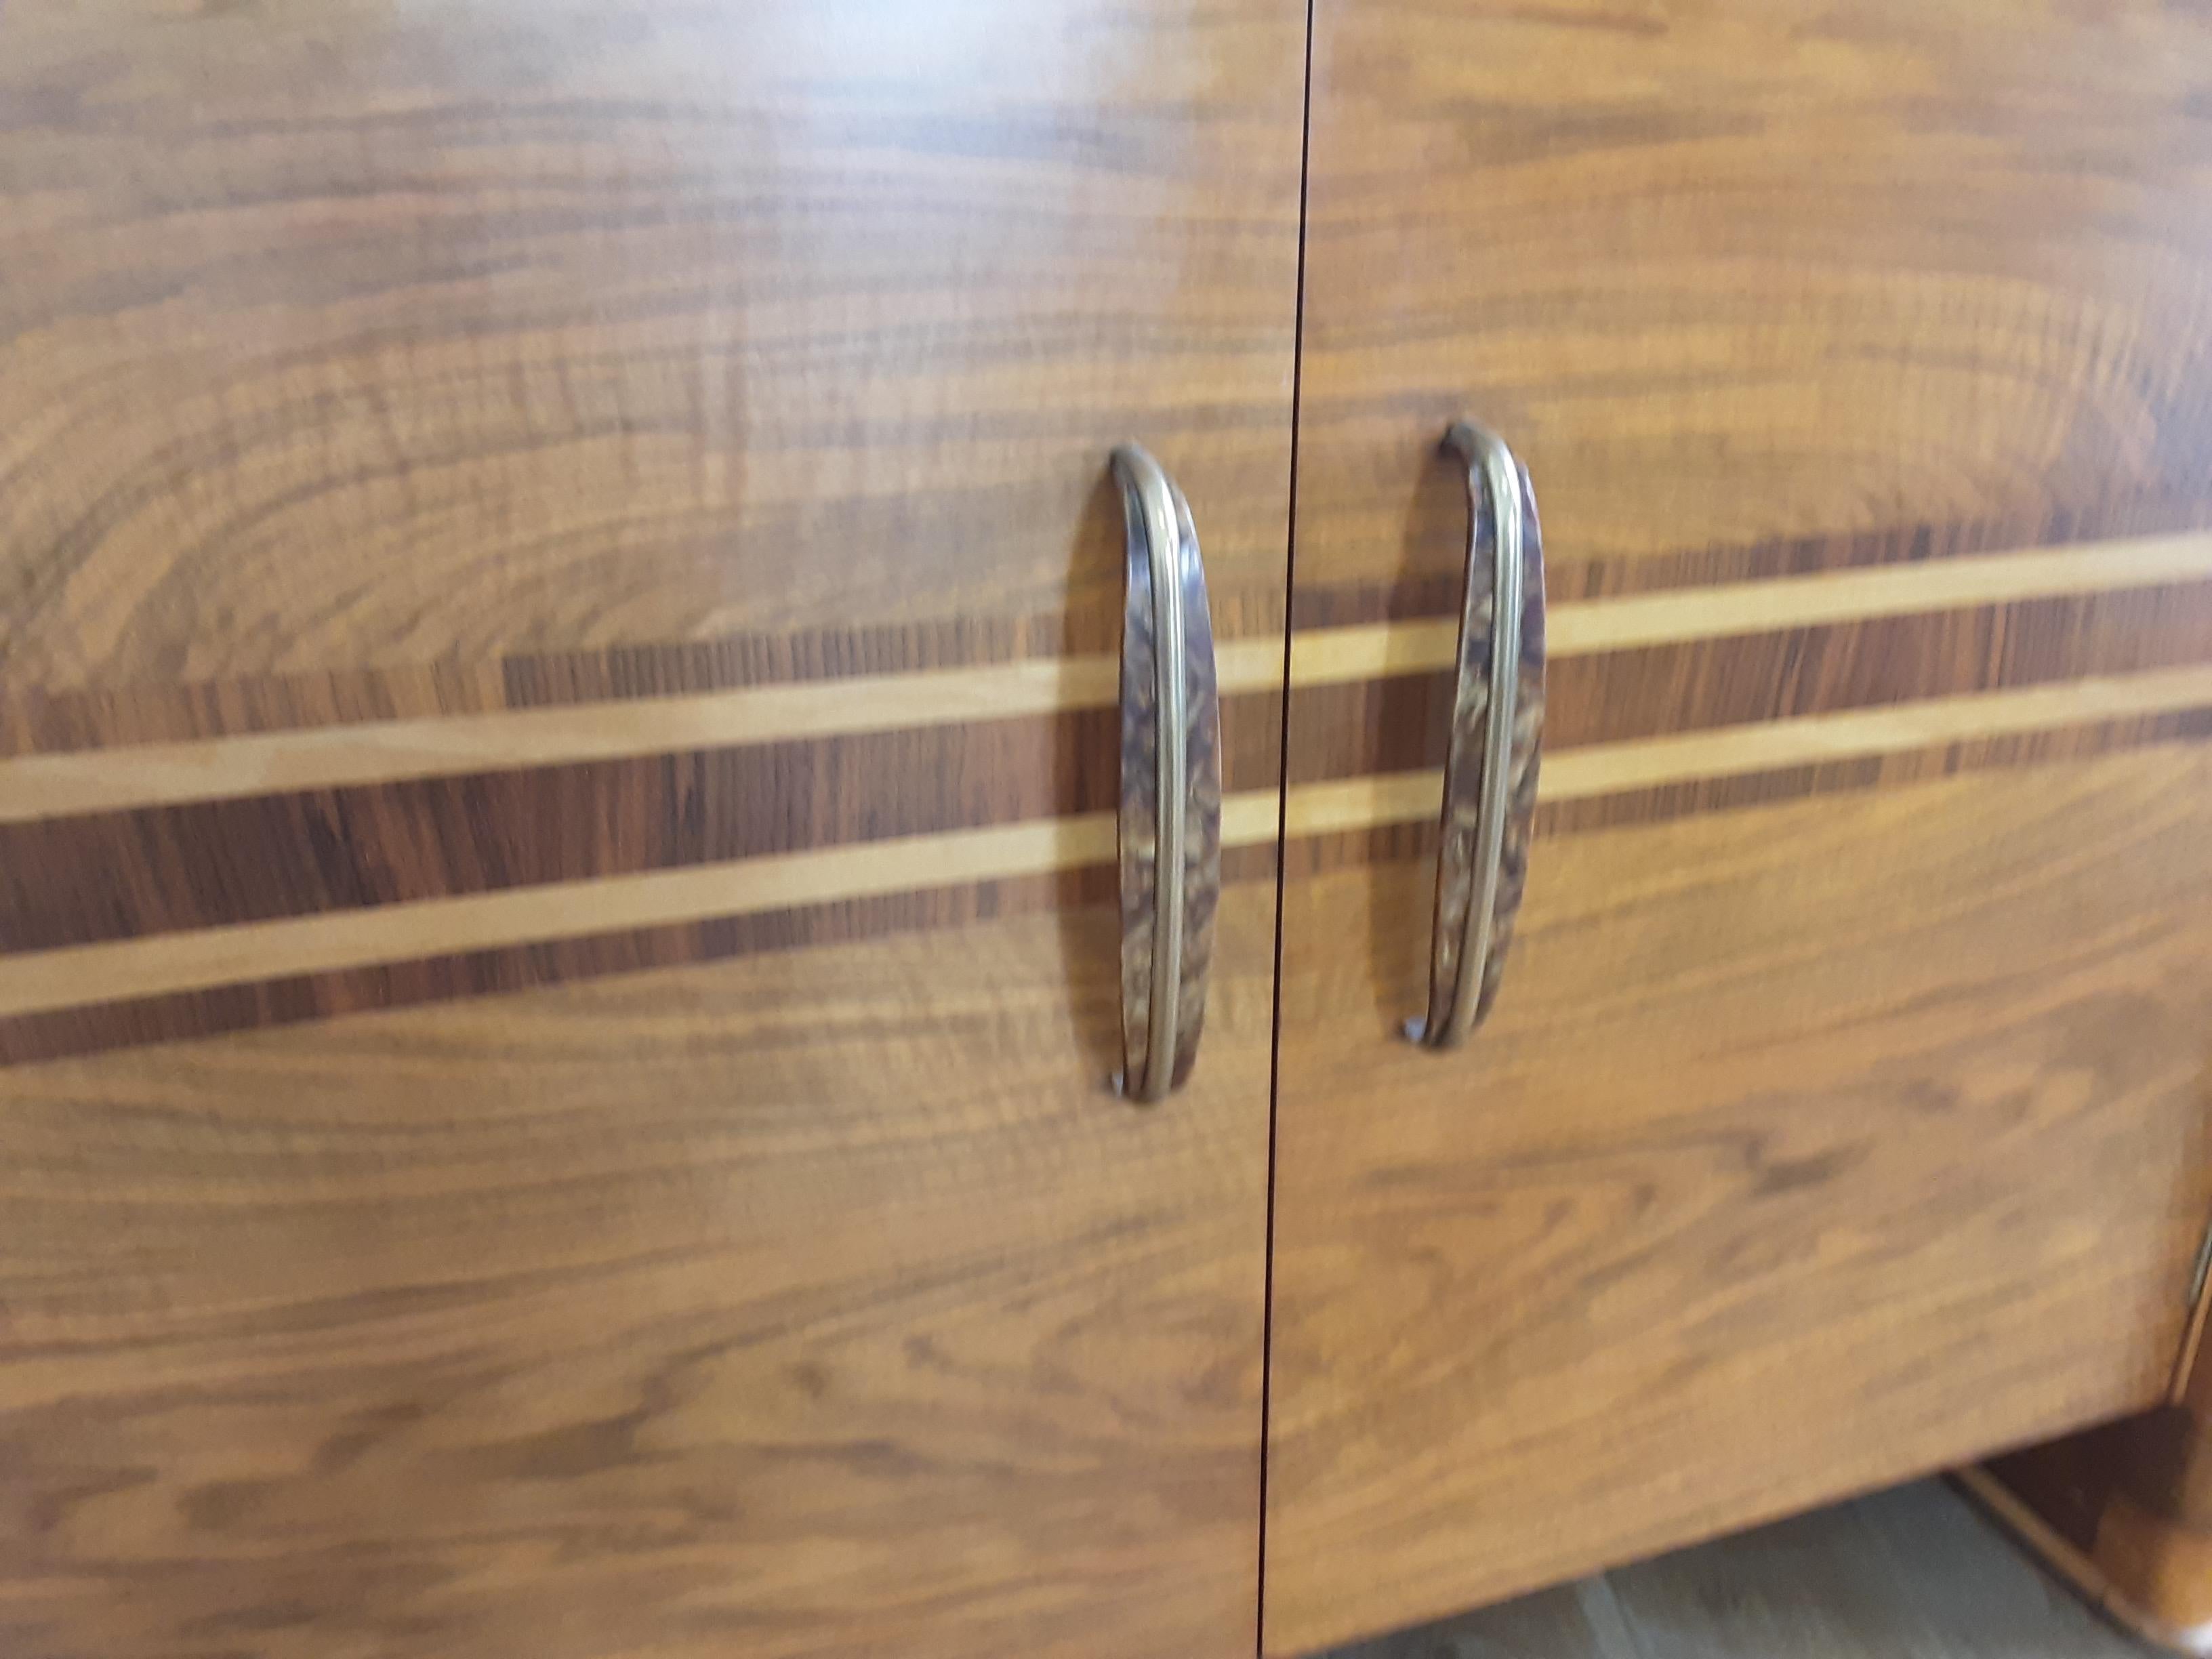 Scottish Art Deco Sideboard in a Golden Brown Walnut with a Modernist Design For Sale 5